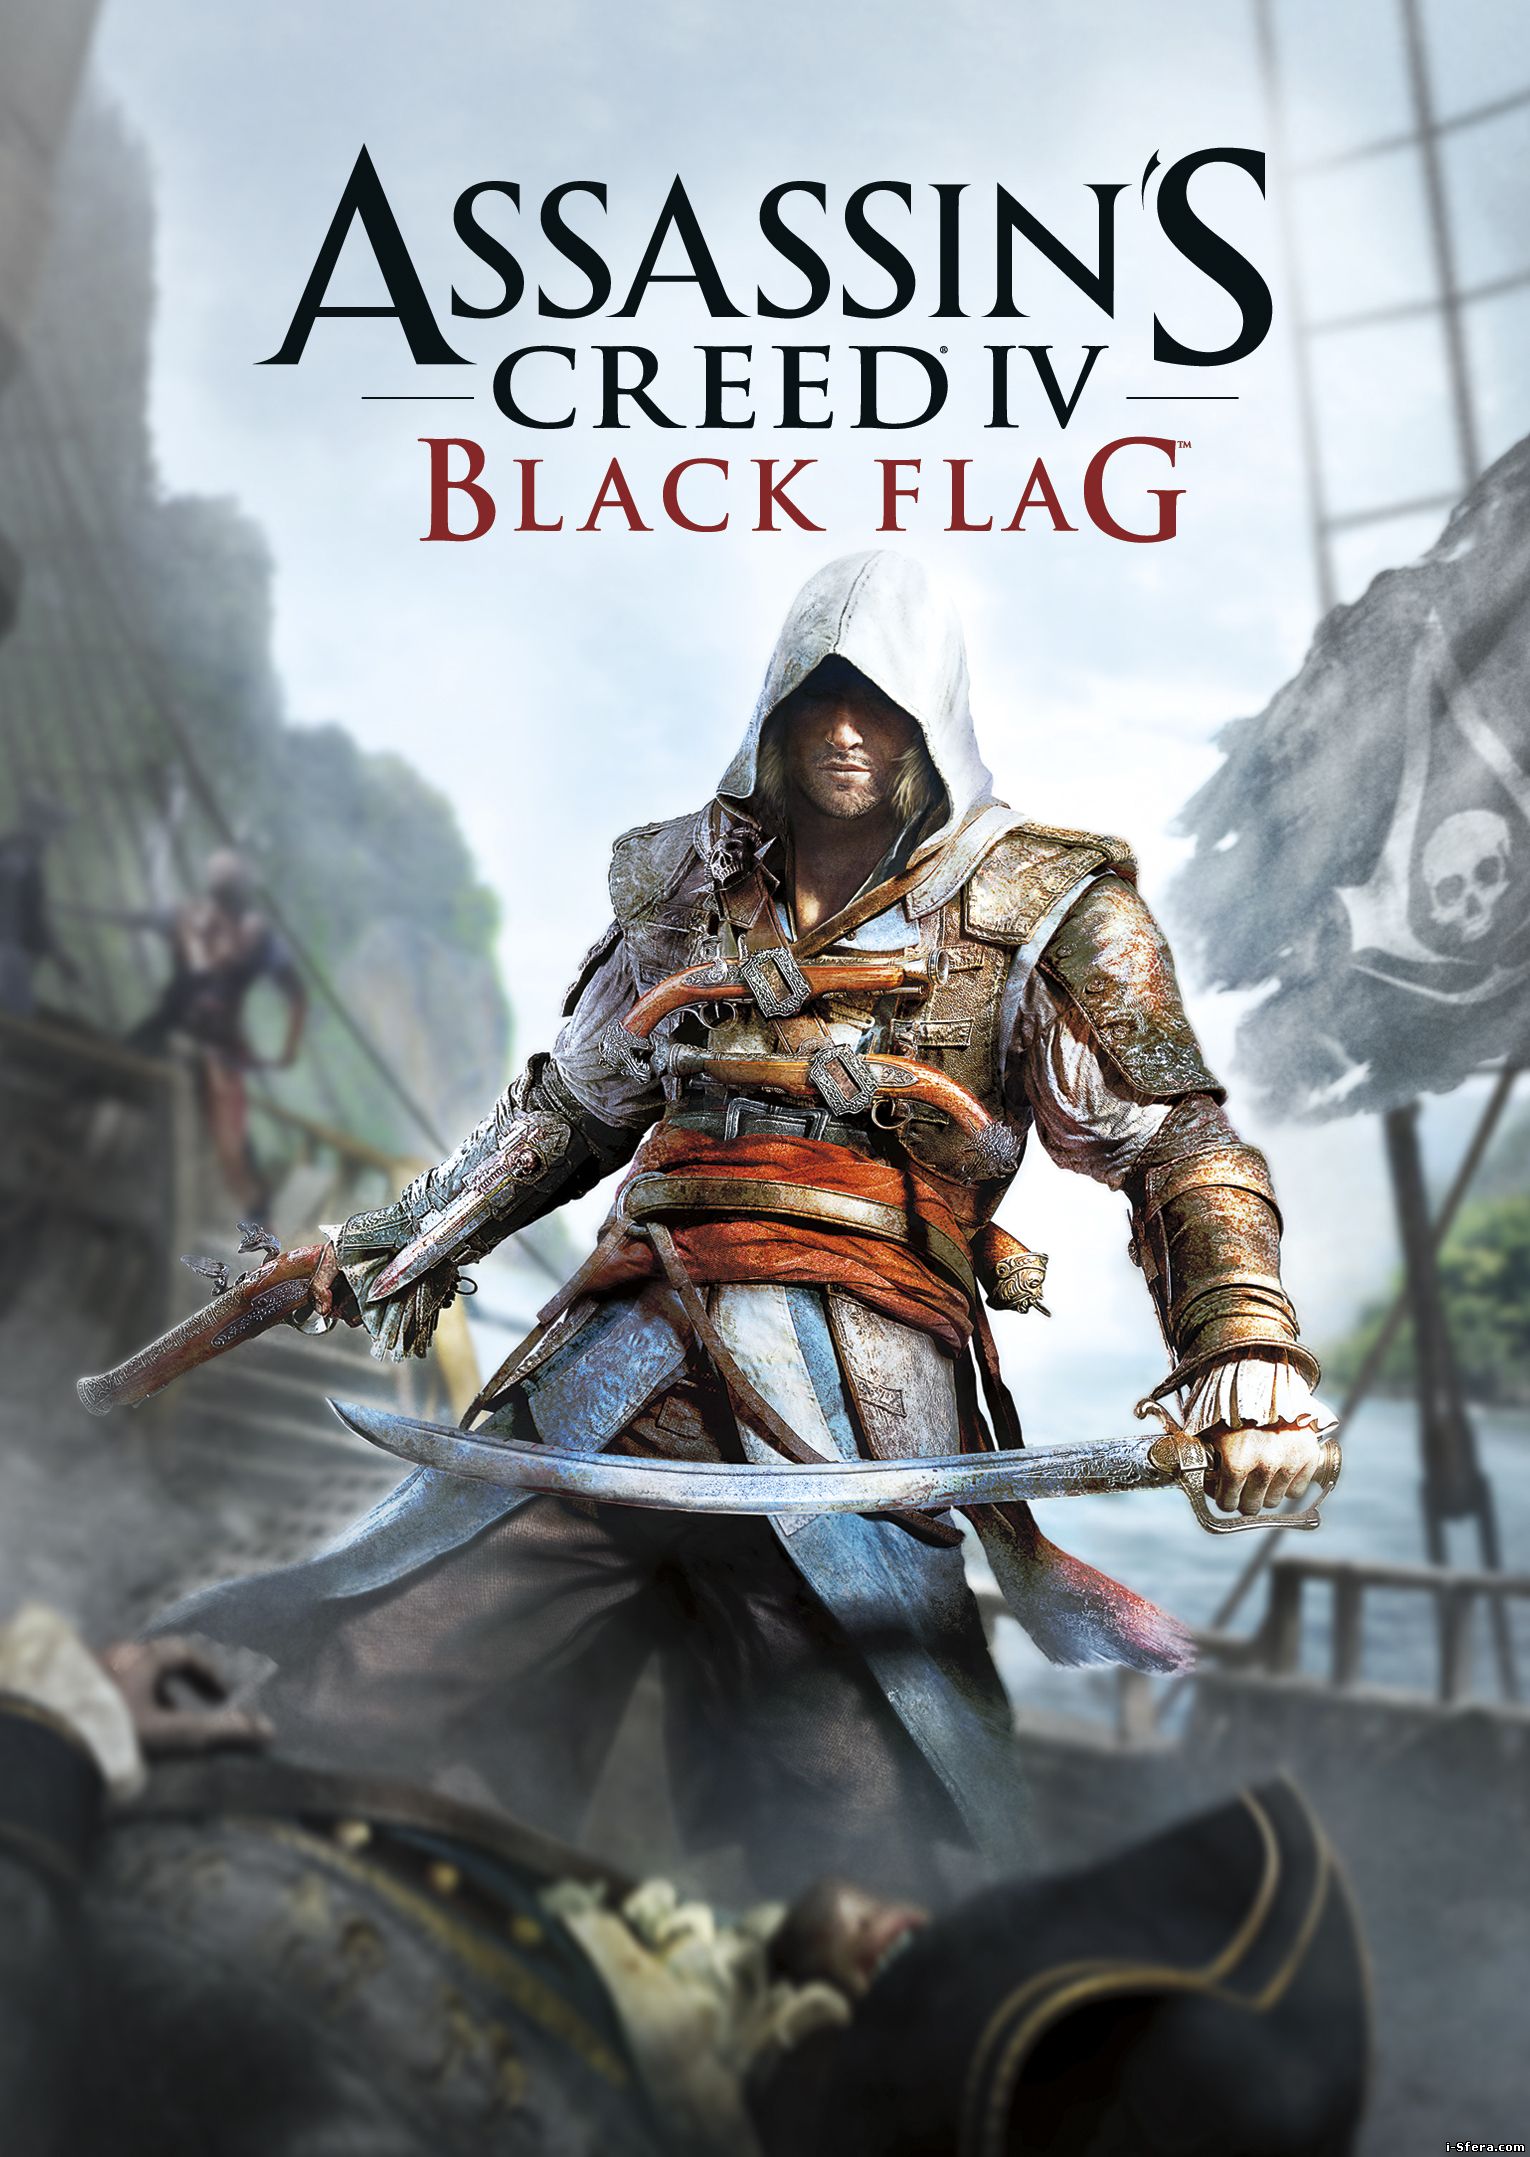 Assassin’s Creed IV Black Flag Digital Deluxe Edition